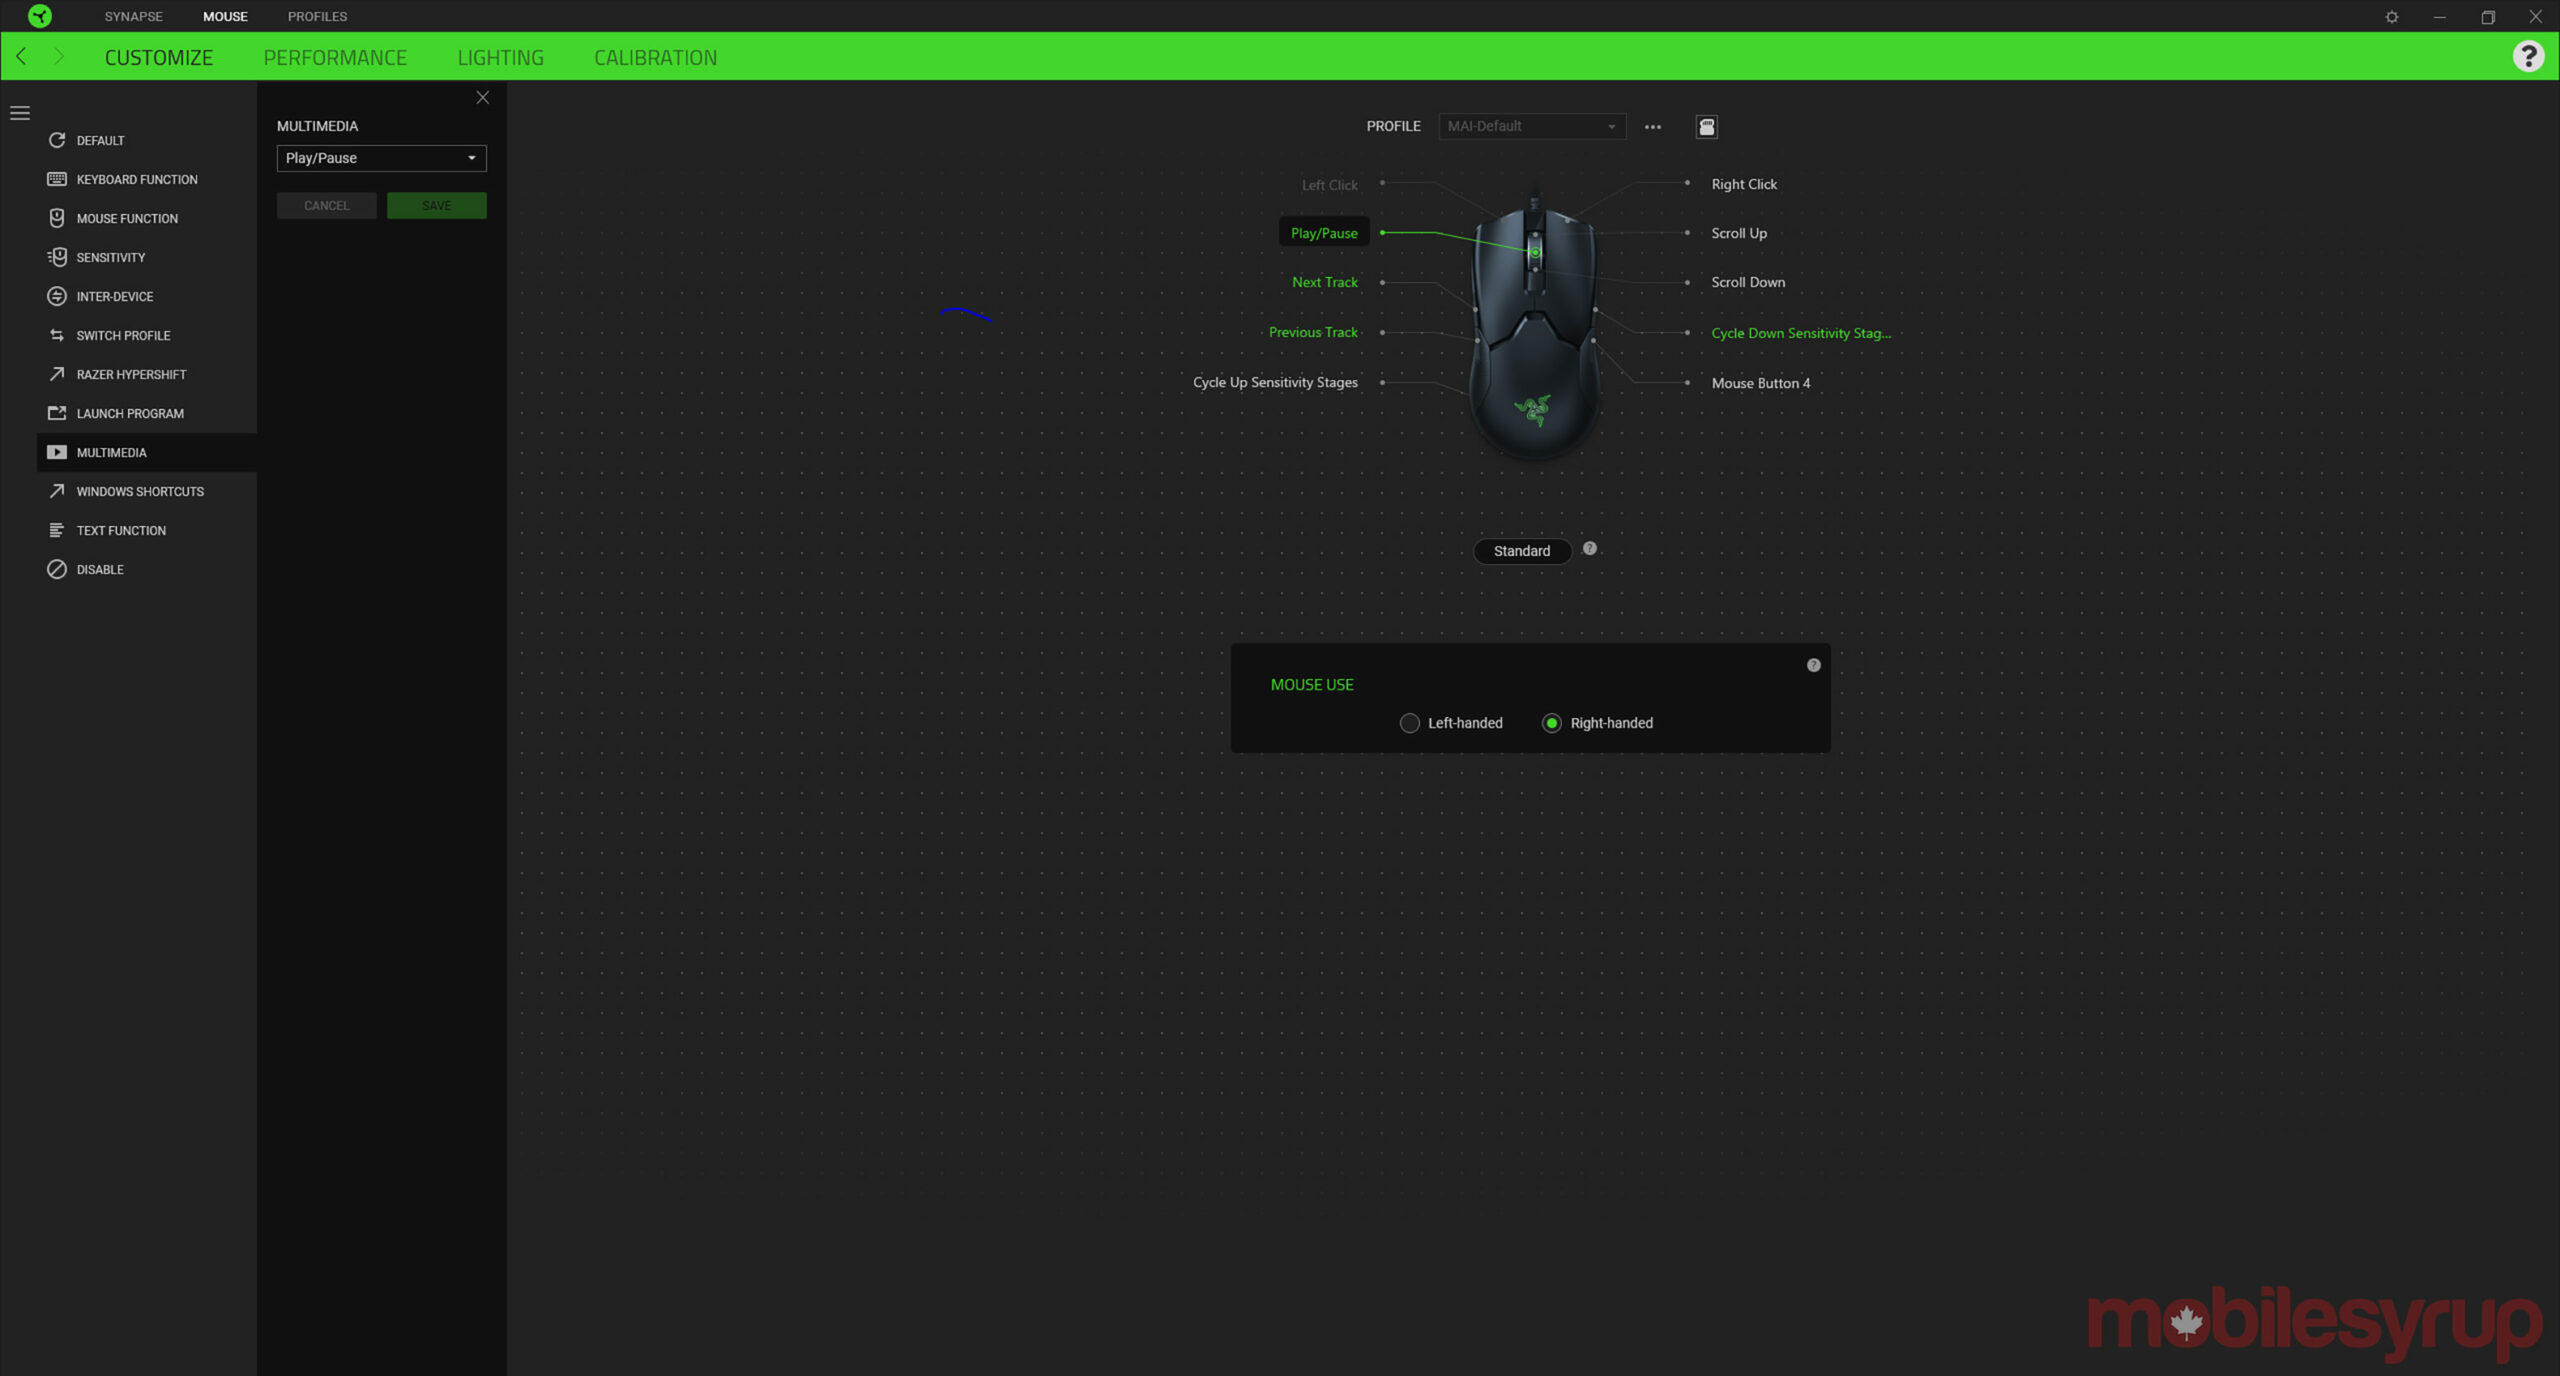 Razer synapse software programmable button layout